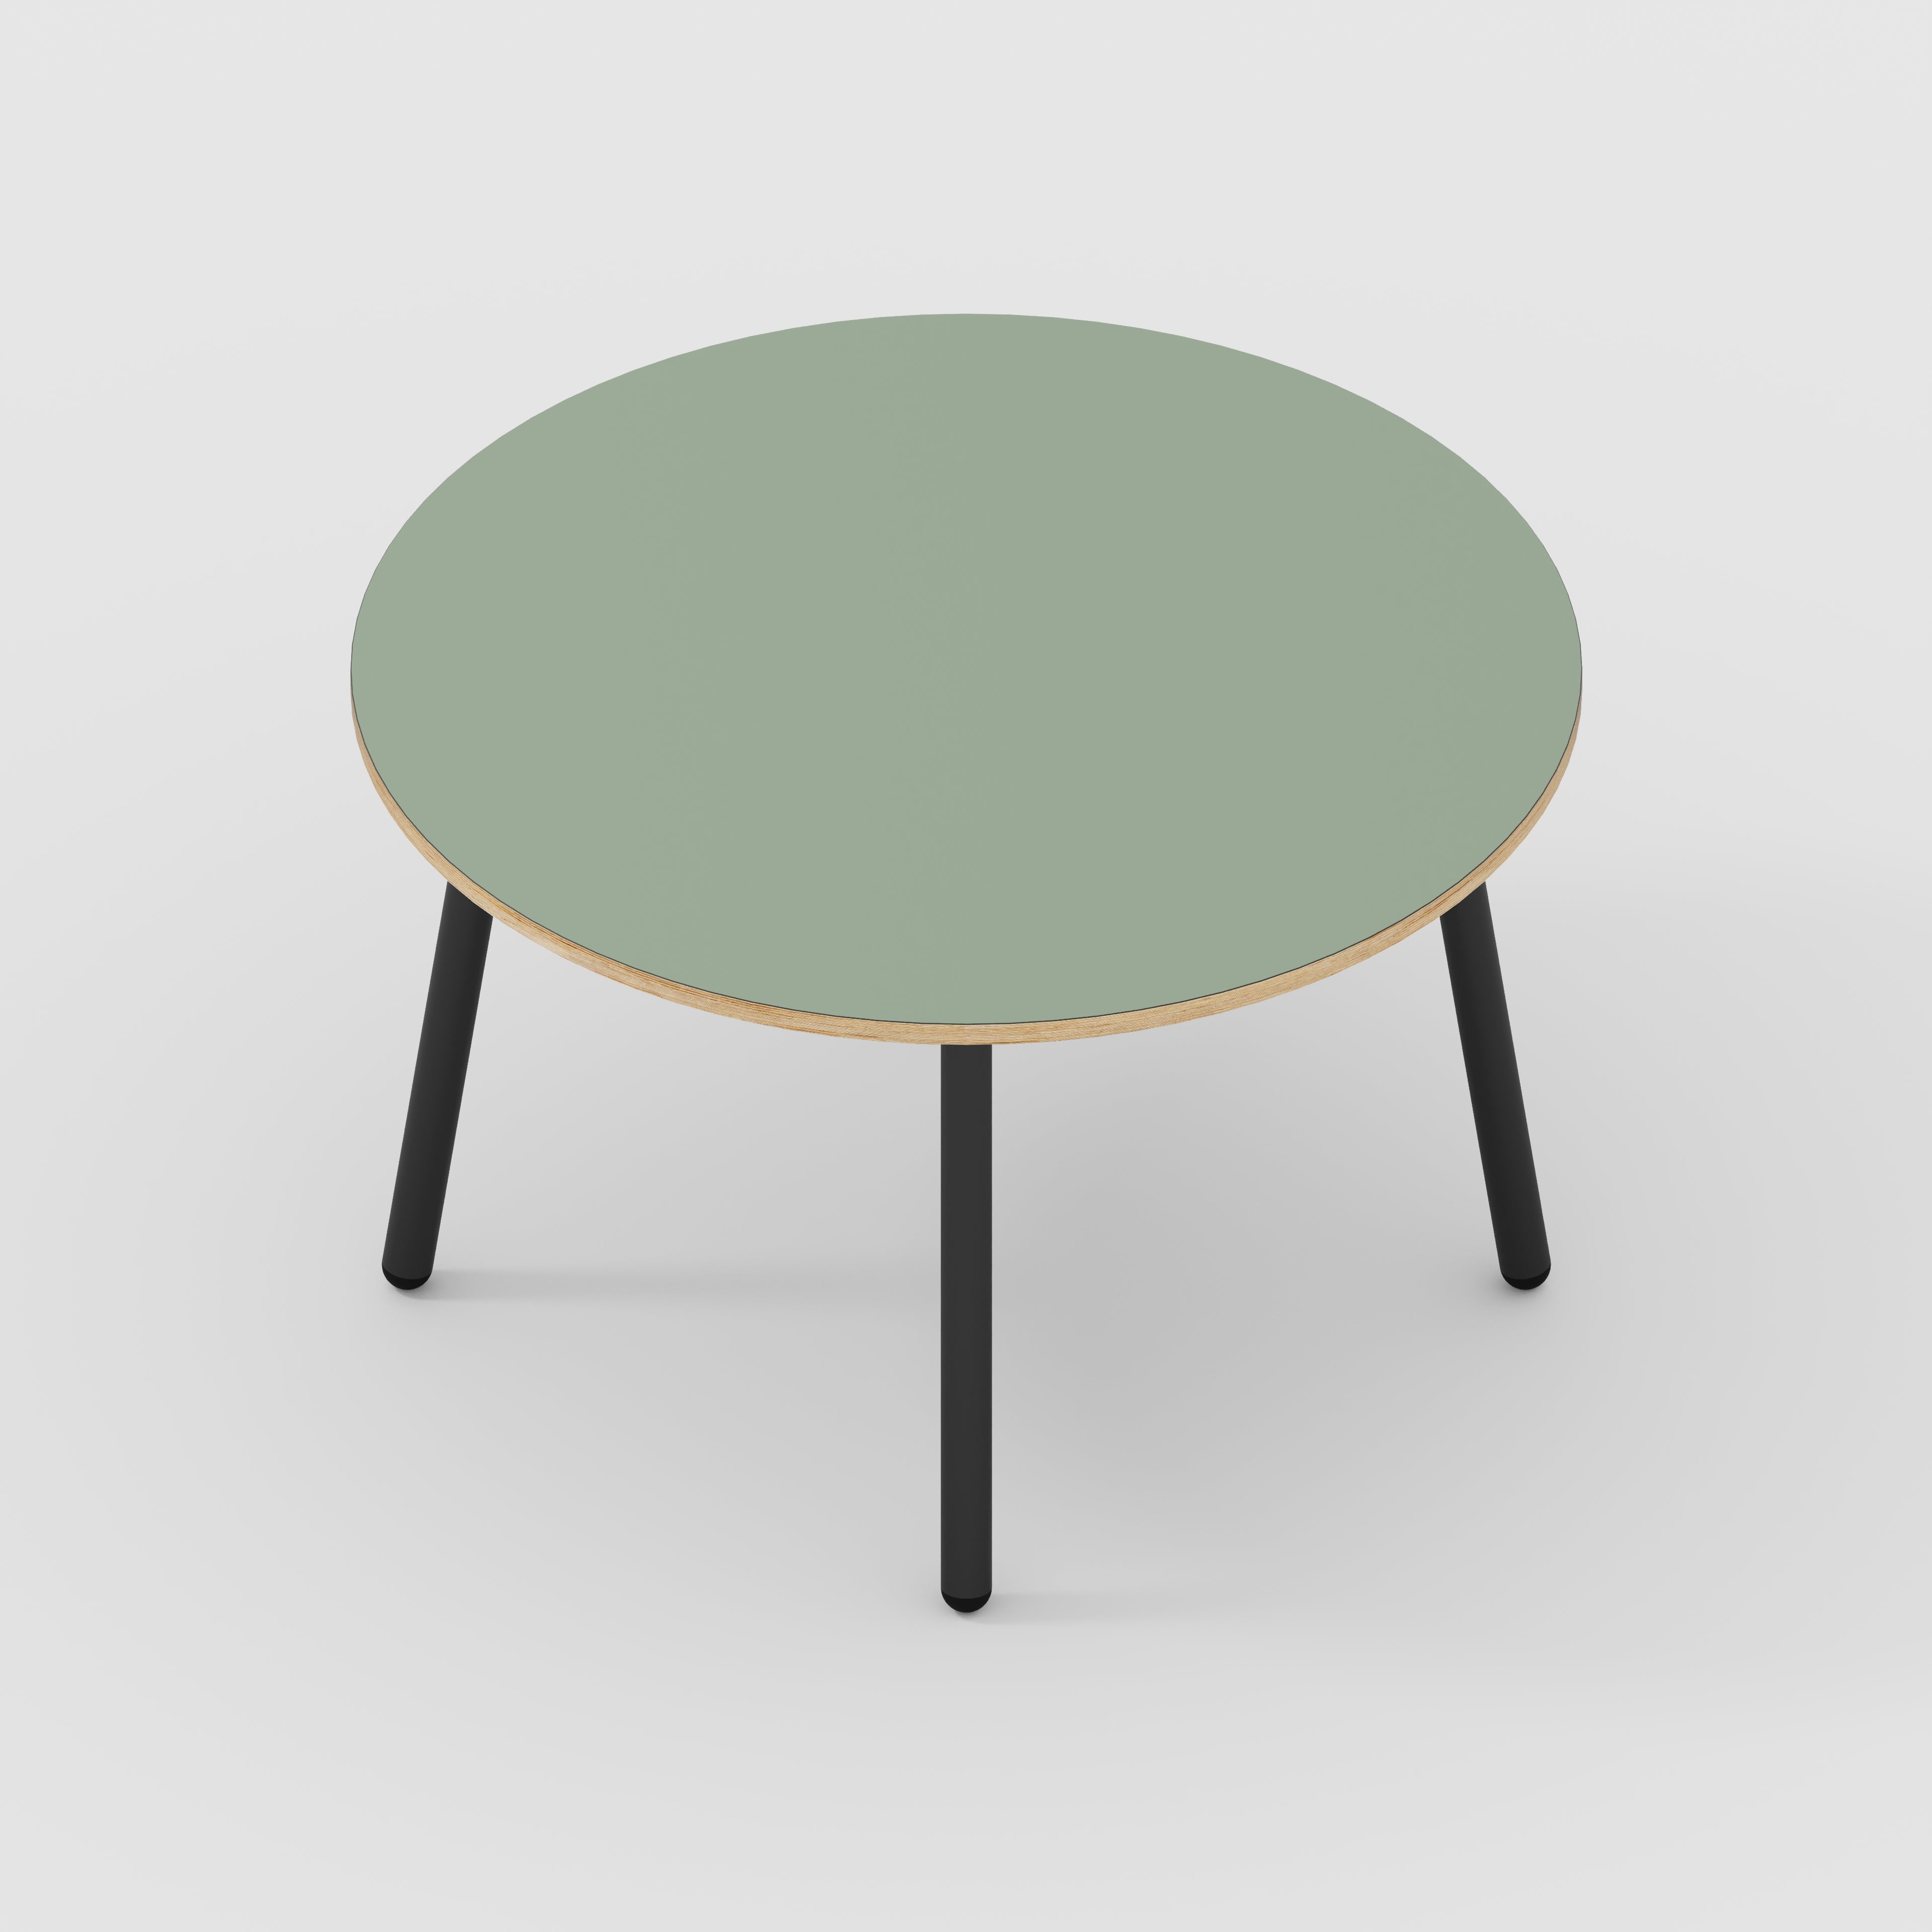 Round Table with Black Round Single Pin Legs - Formica Green Slate - 1200(dia) x 735(h)